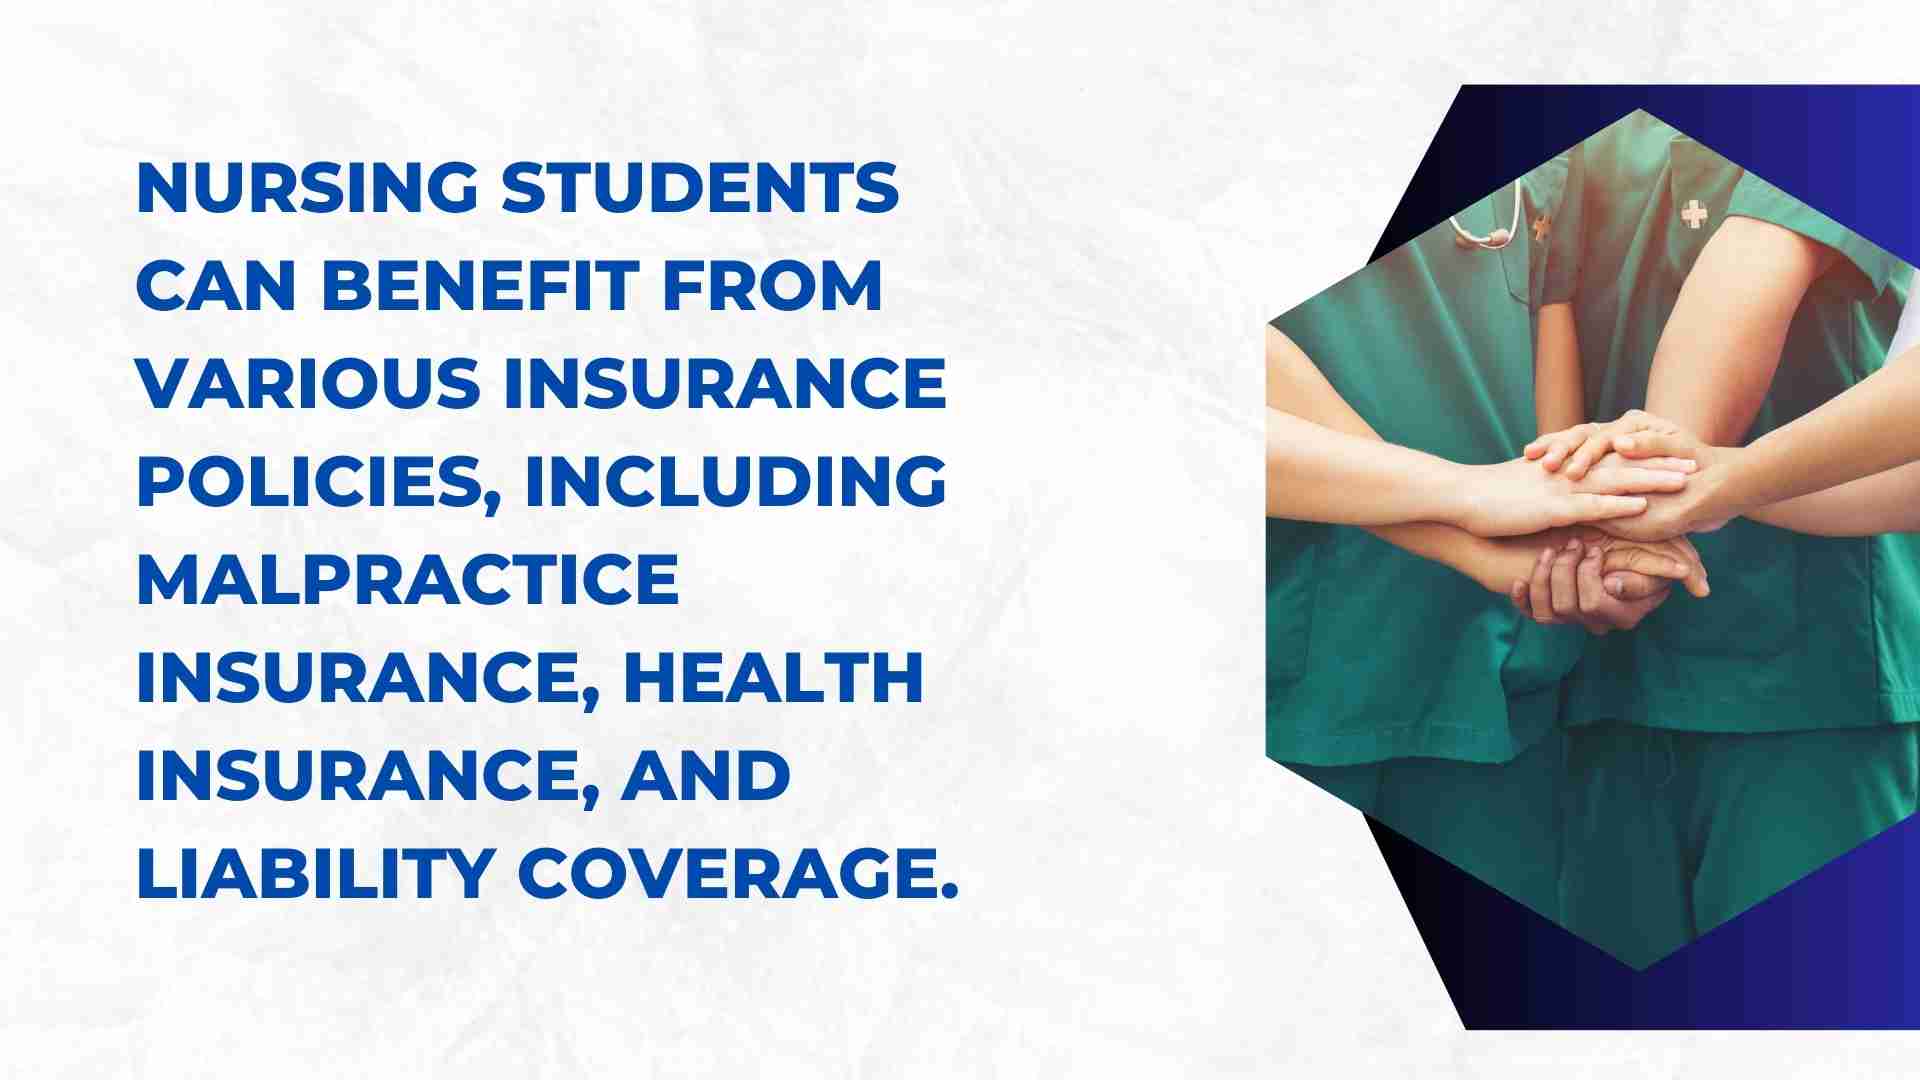 Types of Insurance Policies for Nursing Students